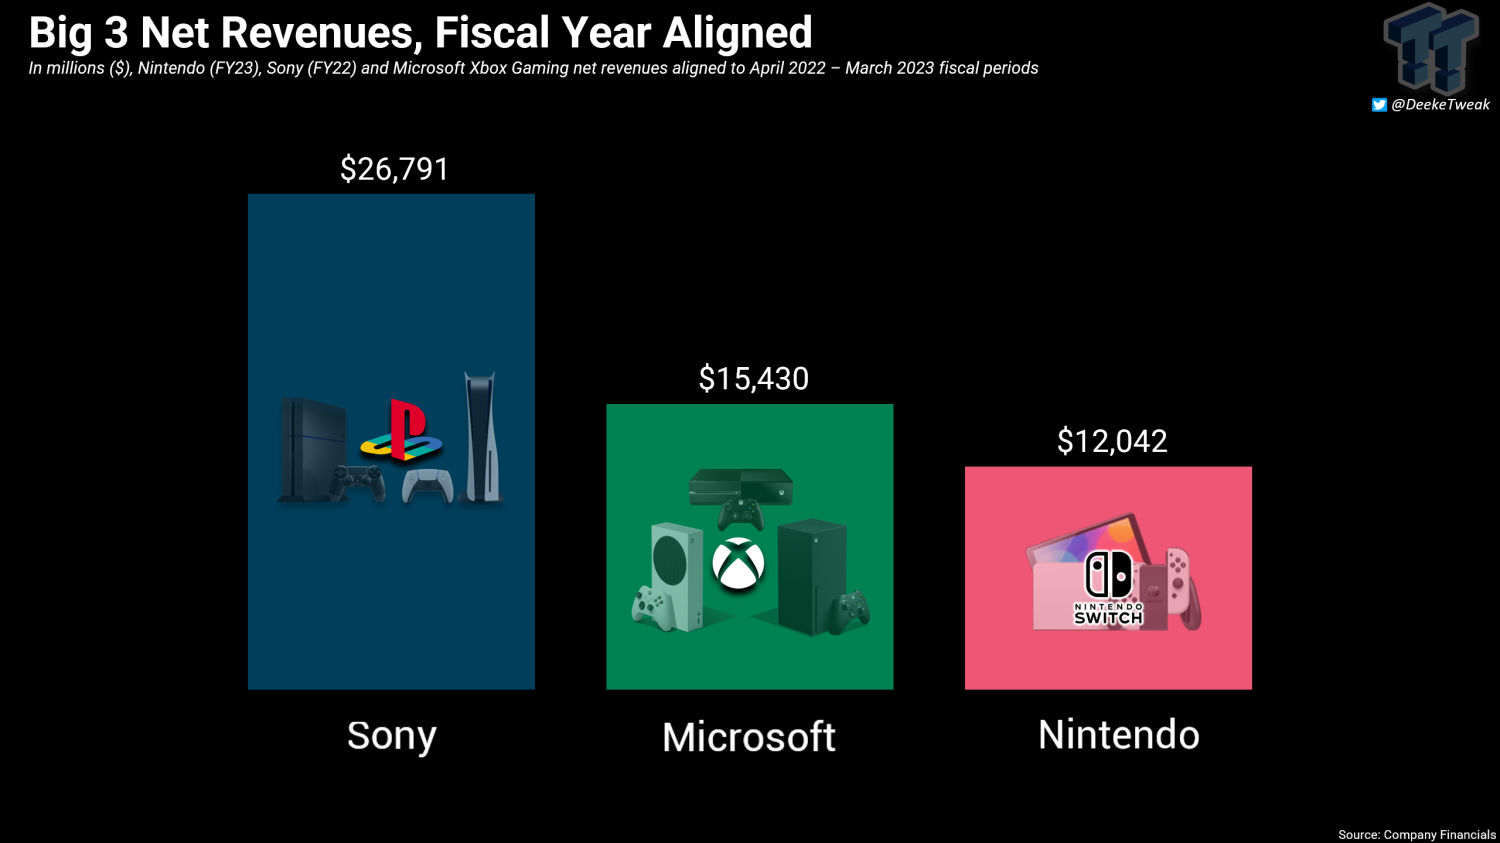 92260_323_big-3-earnings-compared-playstation-vs-xbox-nintendo_full.png